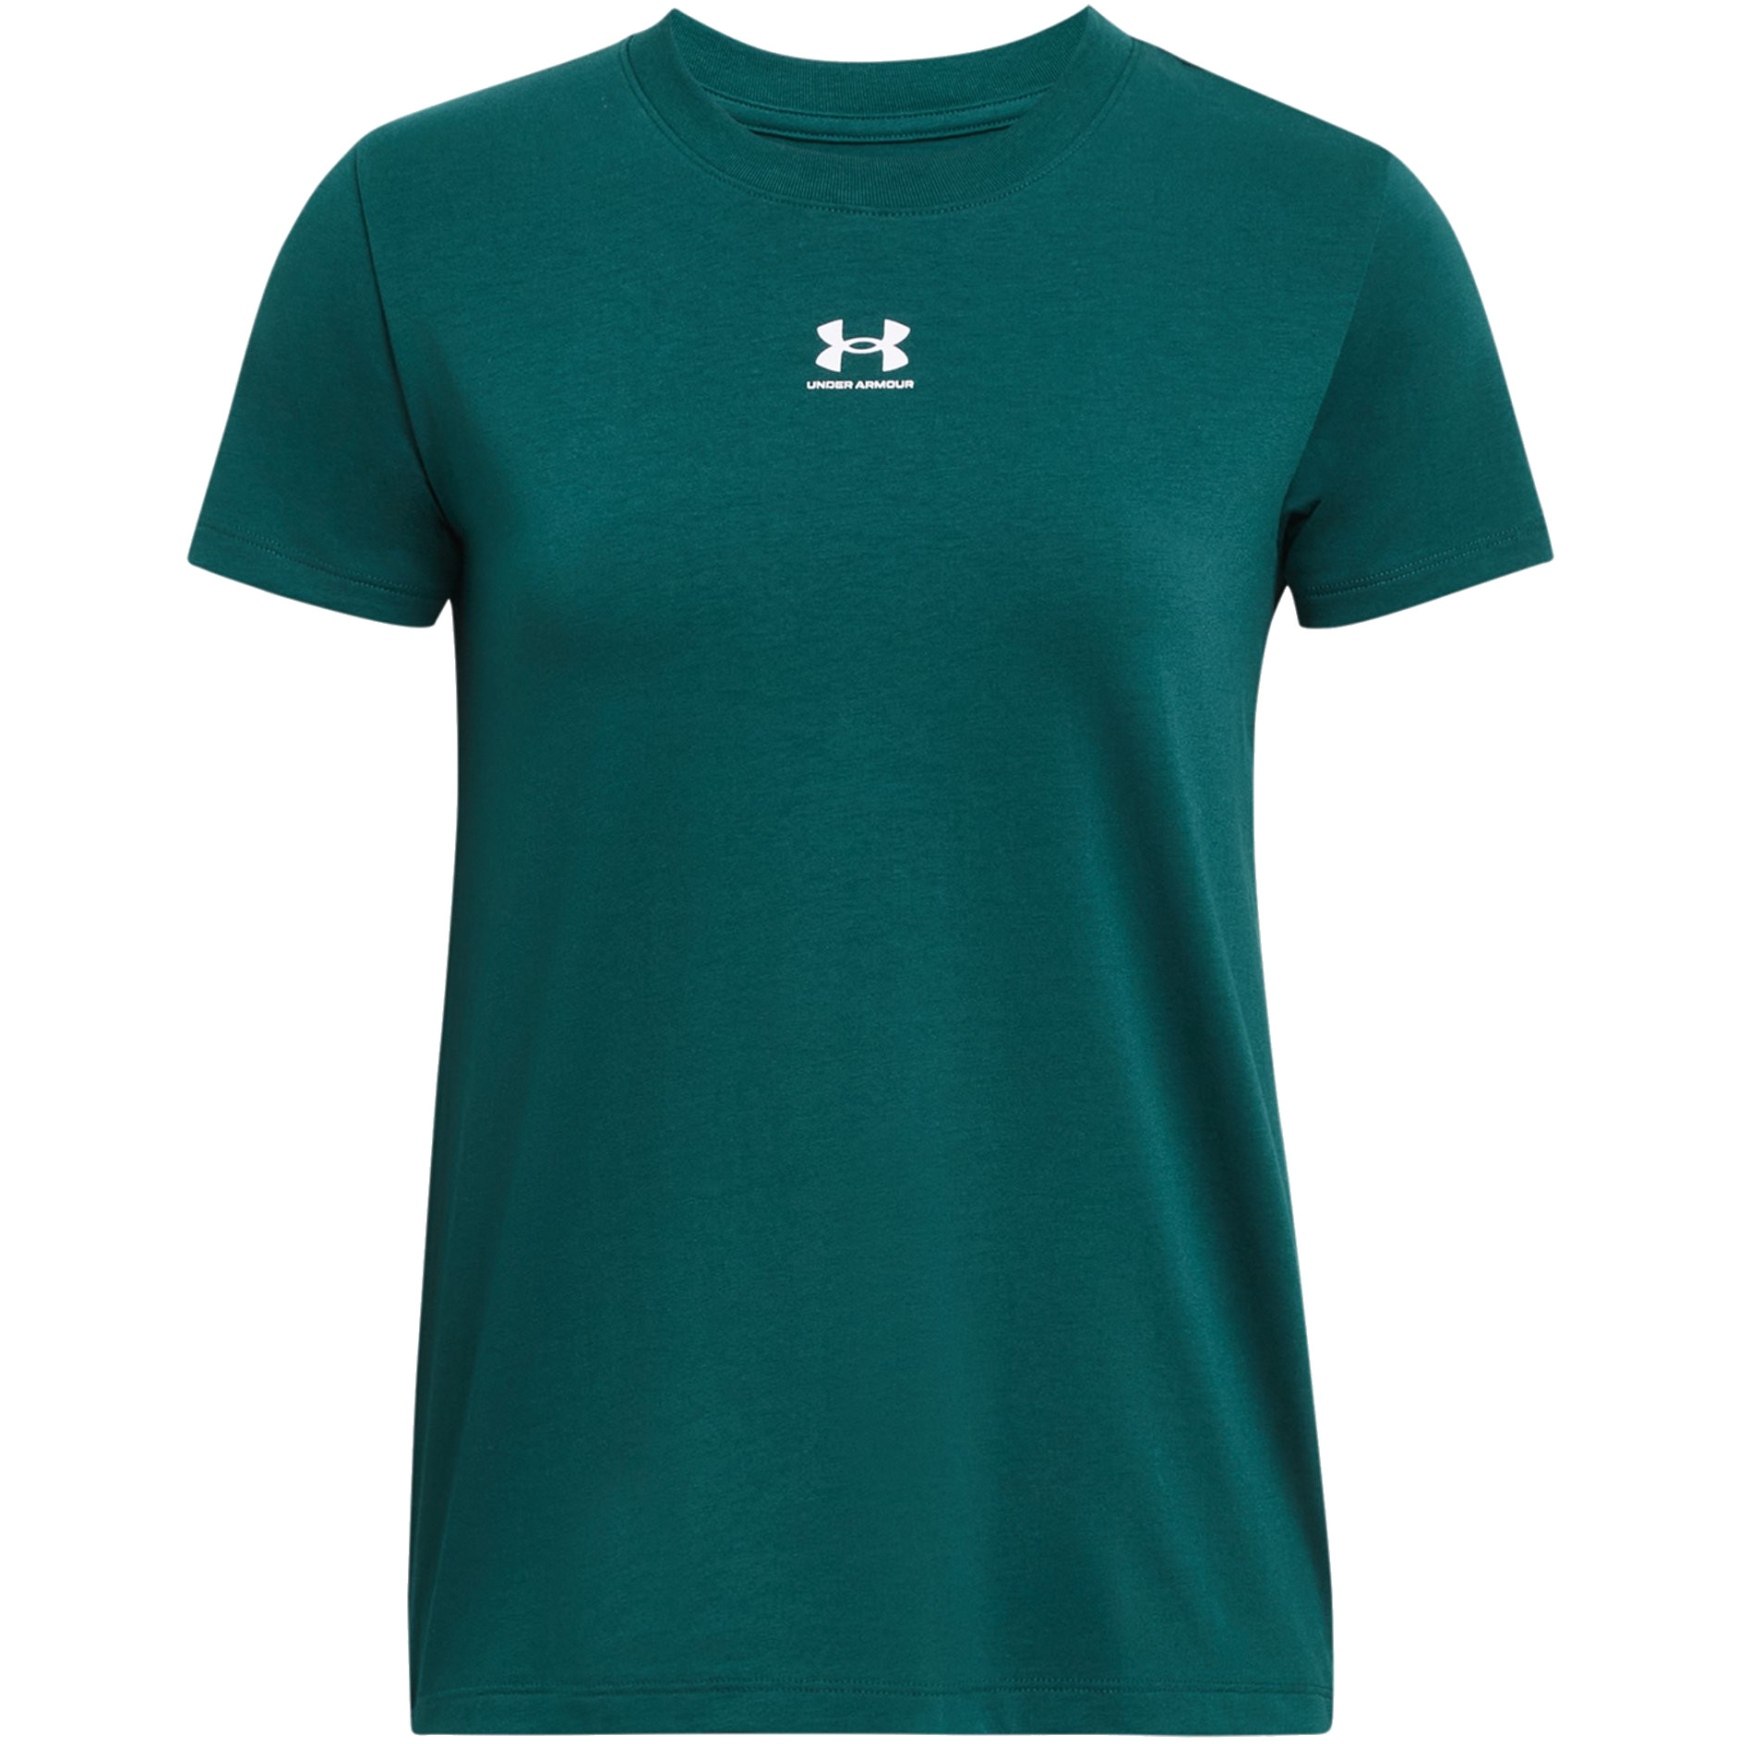 Picture of Under Armour UA Off Campus Core Short Sleeve Shirt Women - Hydro Teal/White